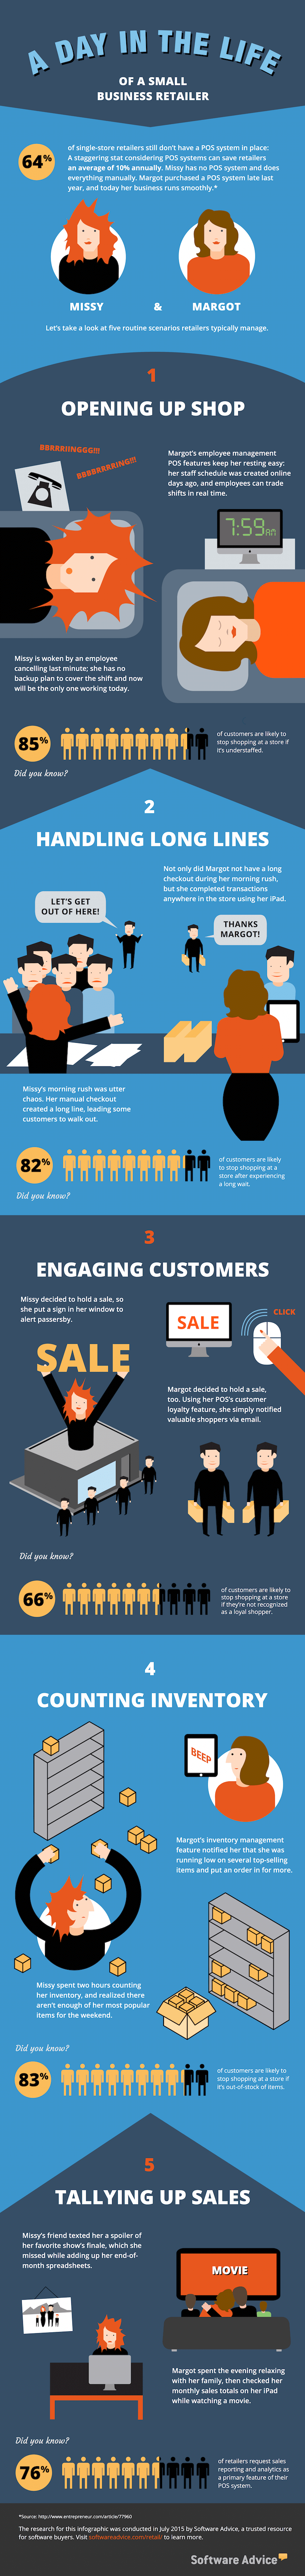 Point of Sale Infographic